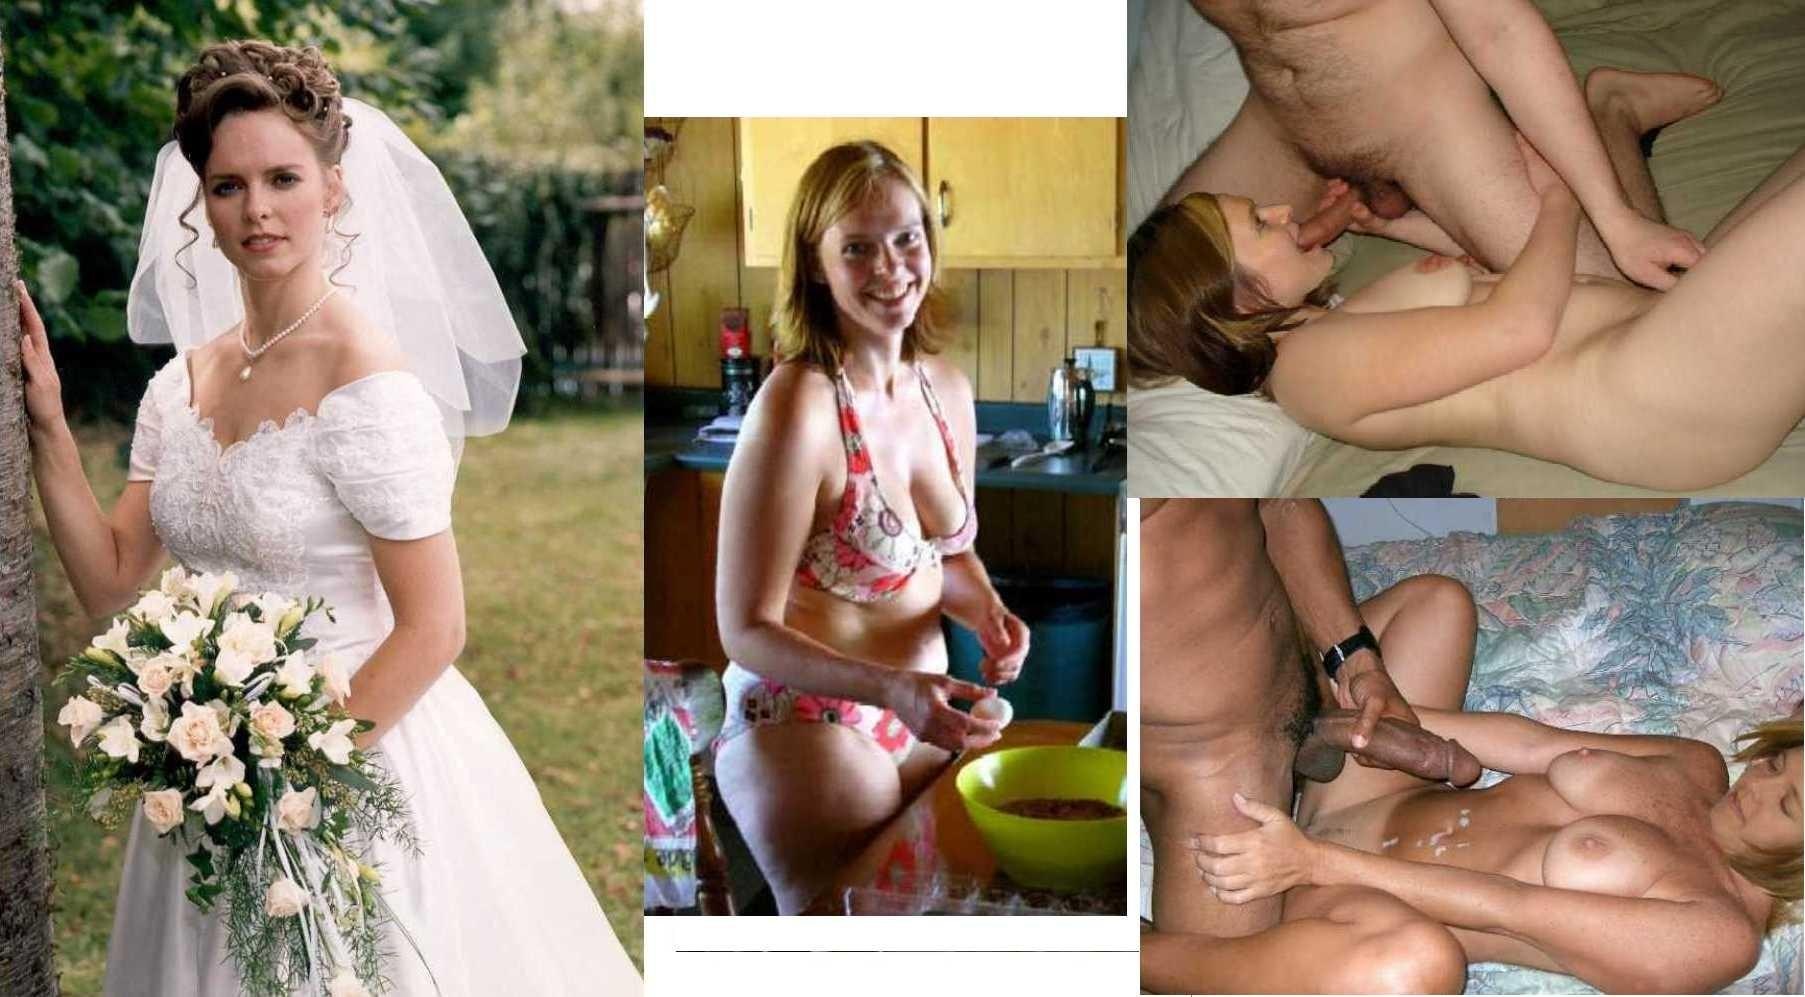 naked pictures of married women